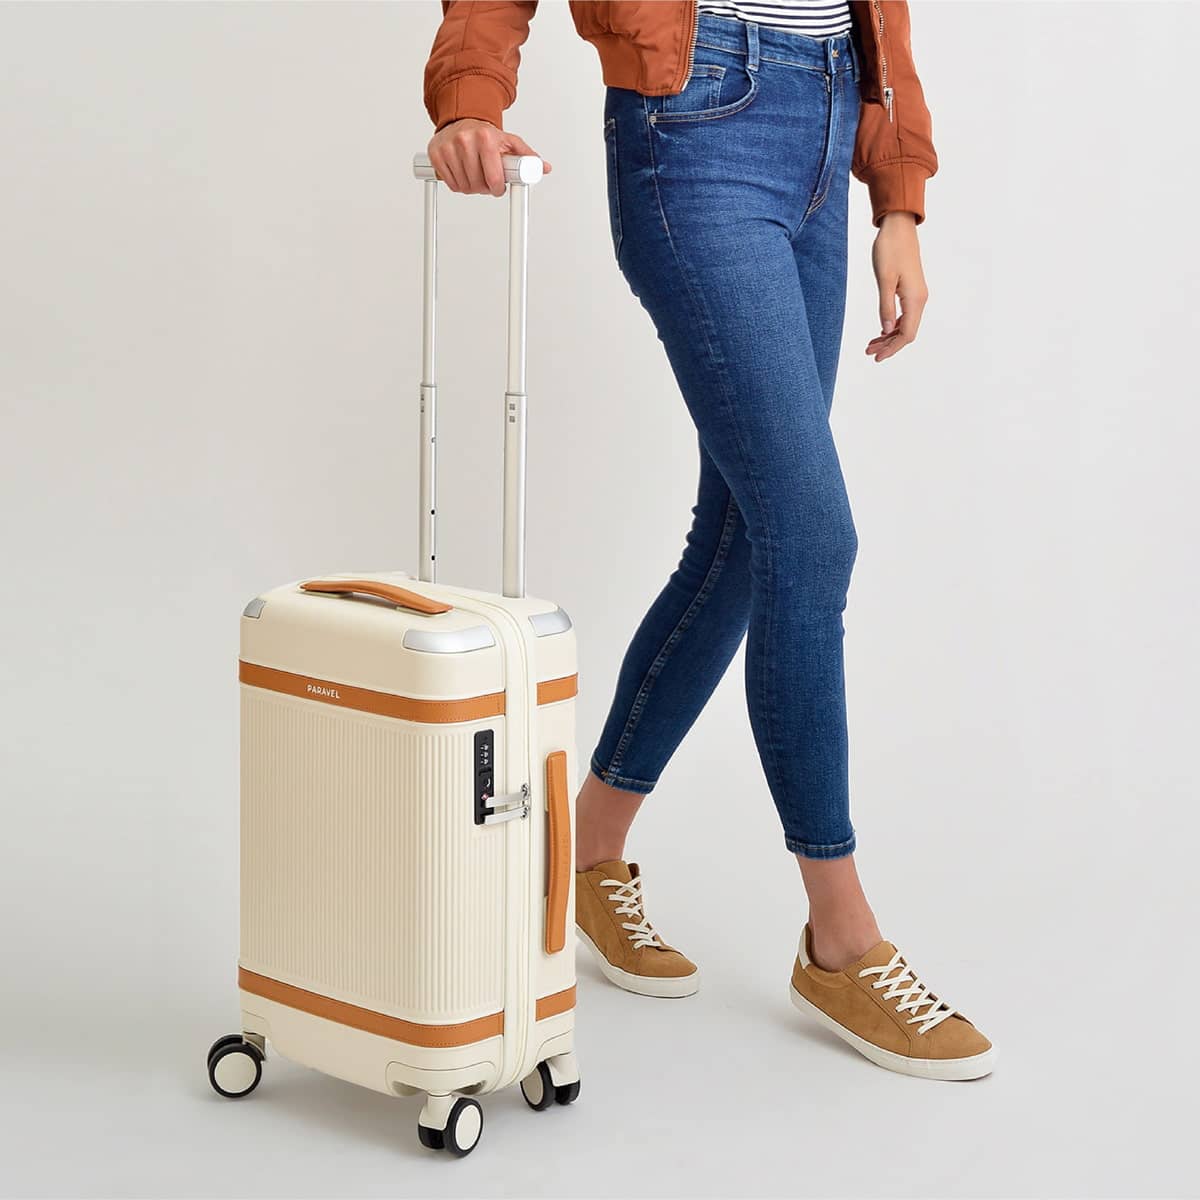 Durable and lightweight carry-on suitcase